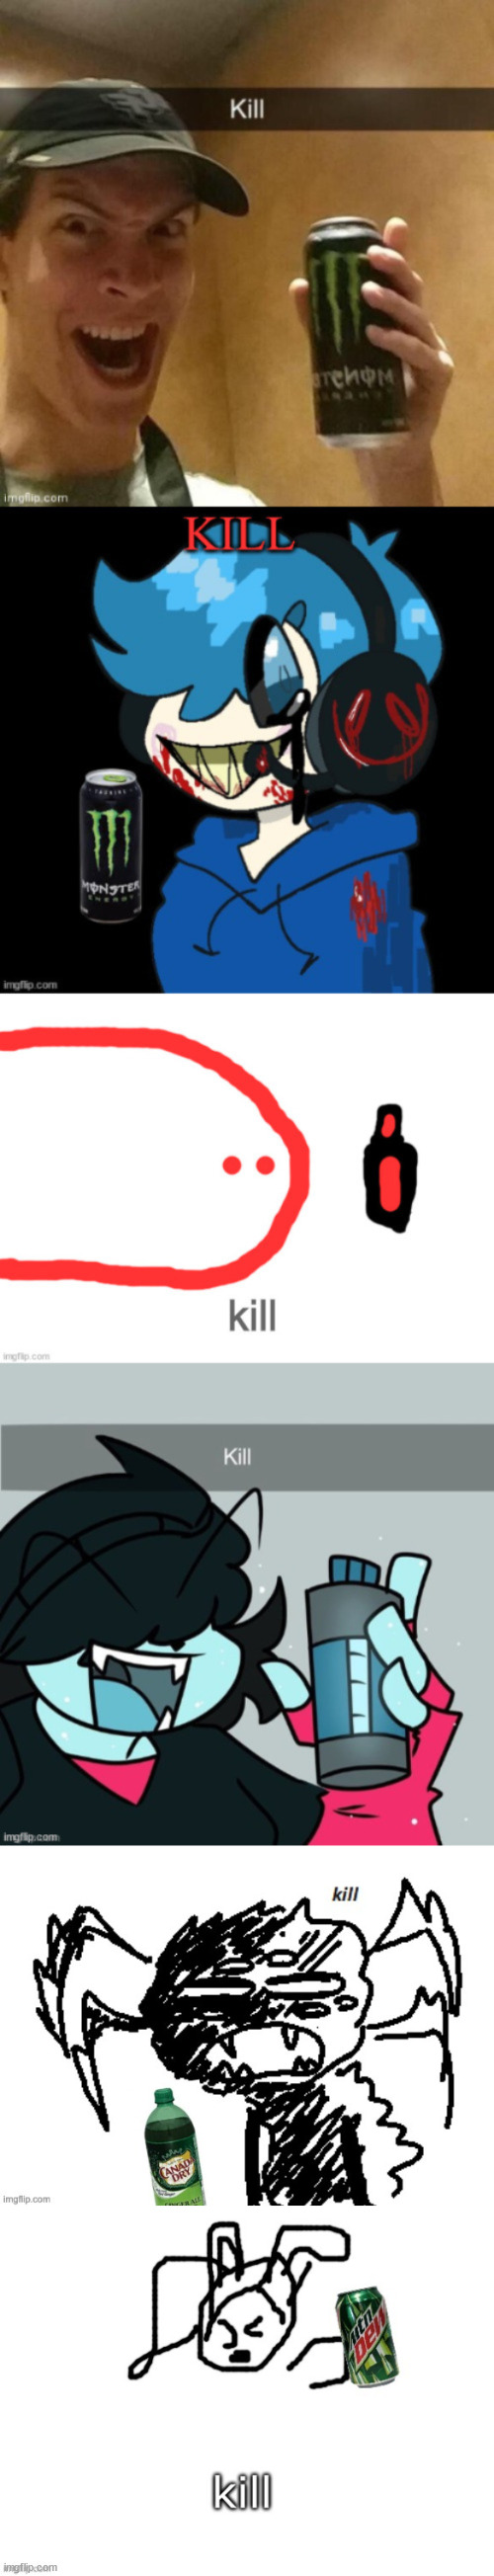 kill more | image tagged in kill | made w/ Imgflip meme maker